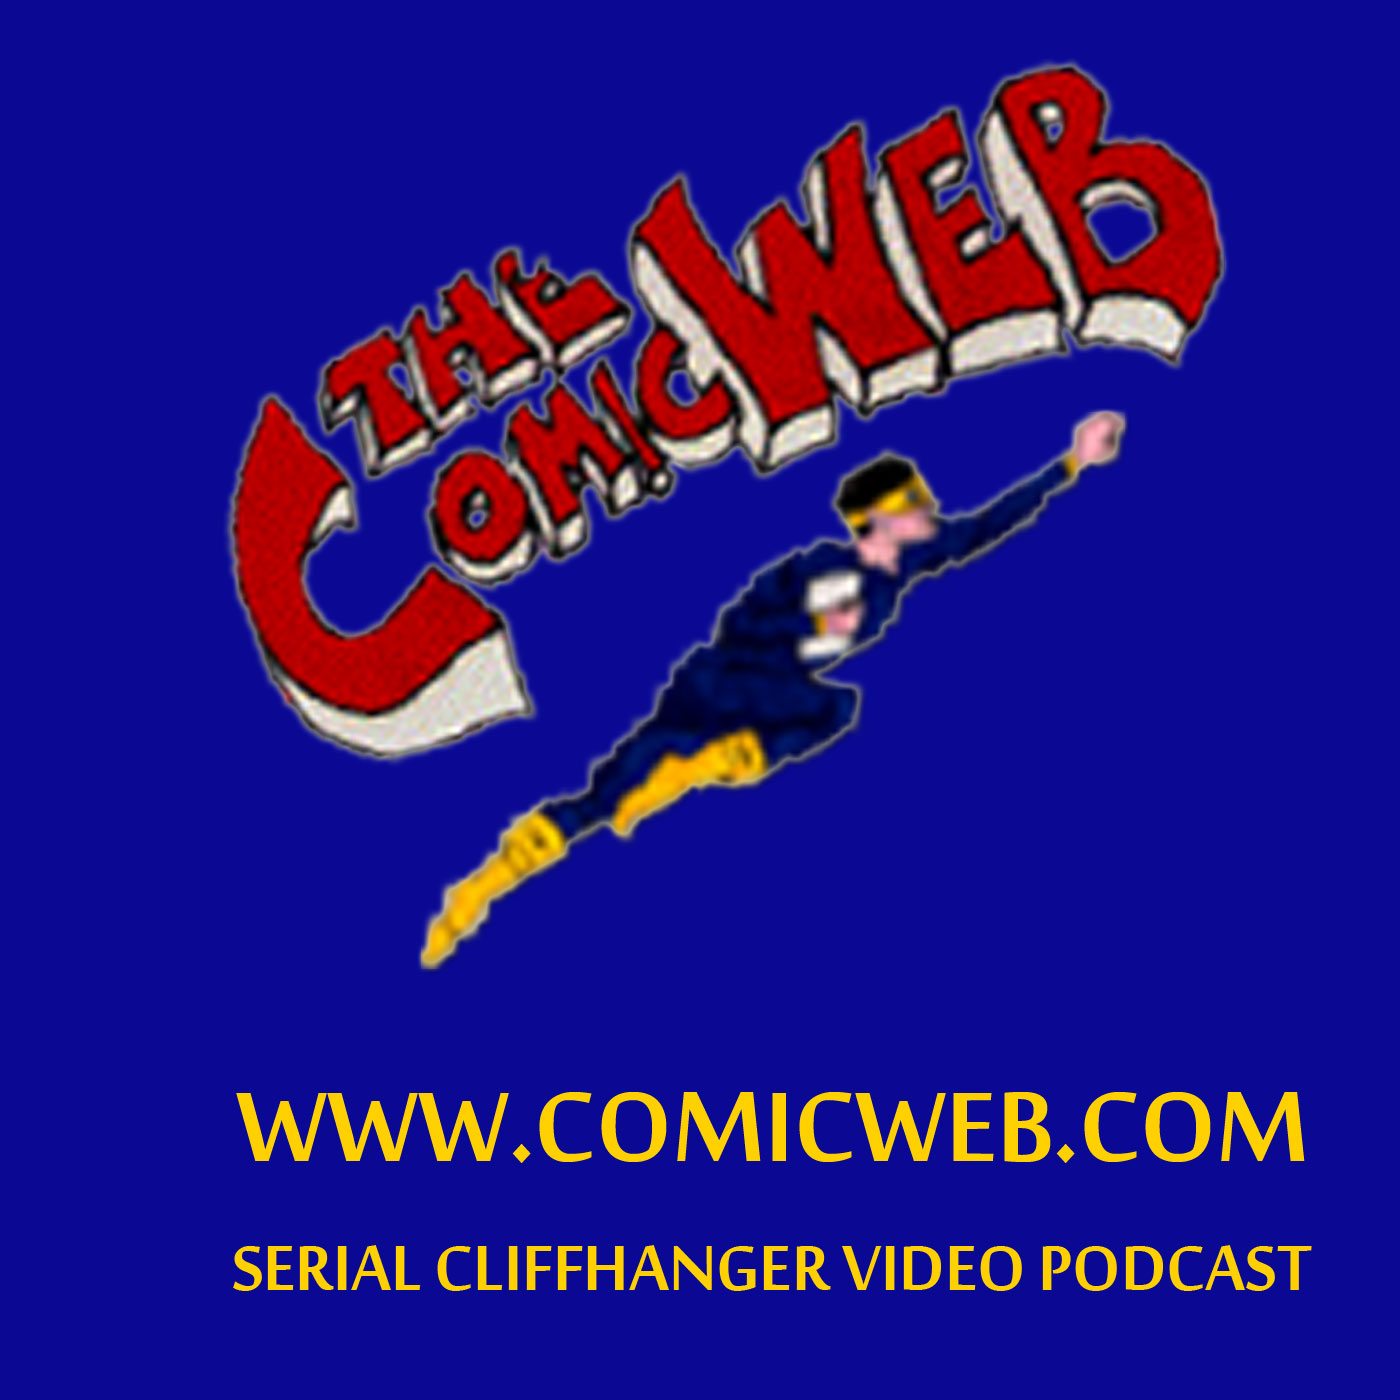 ComicWeb Serial Cliffhanger Video Podcast logo